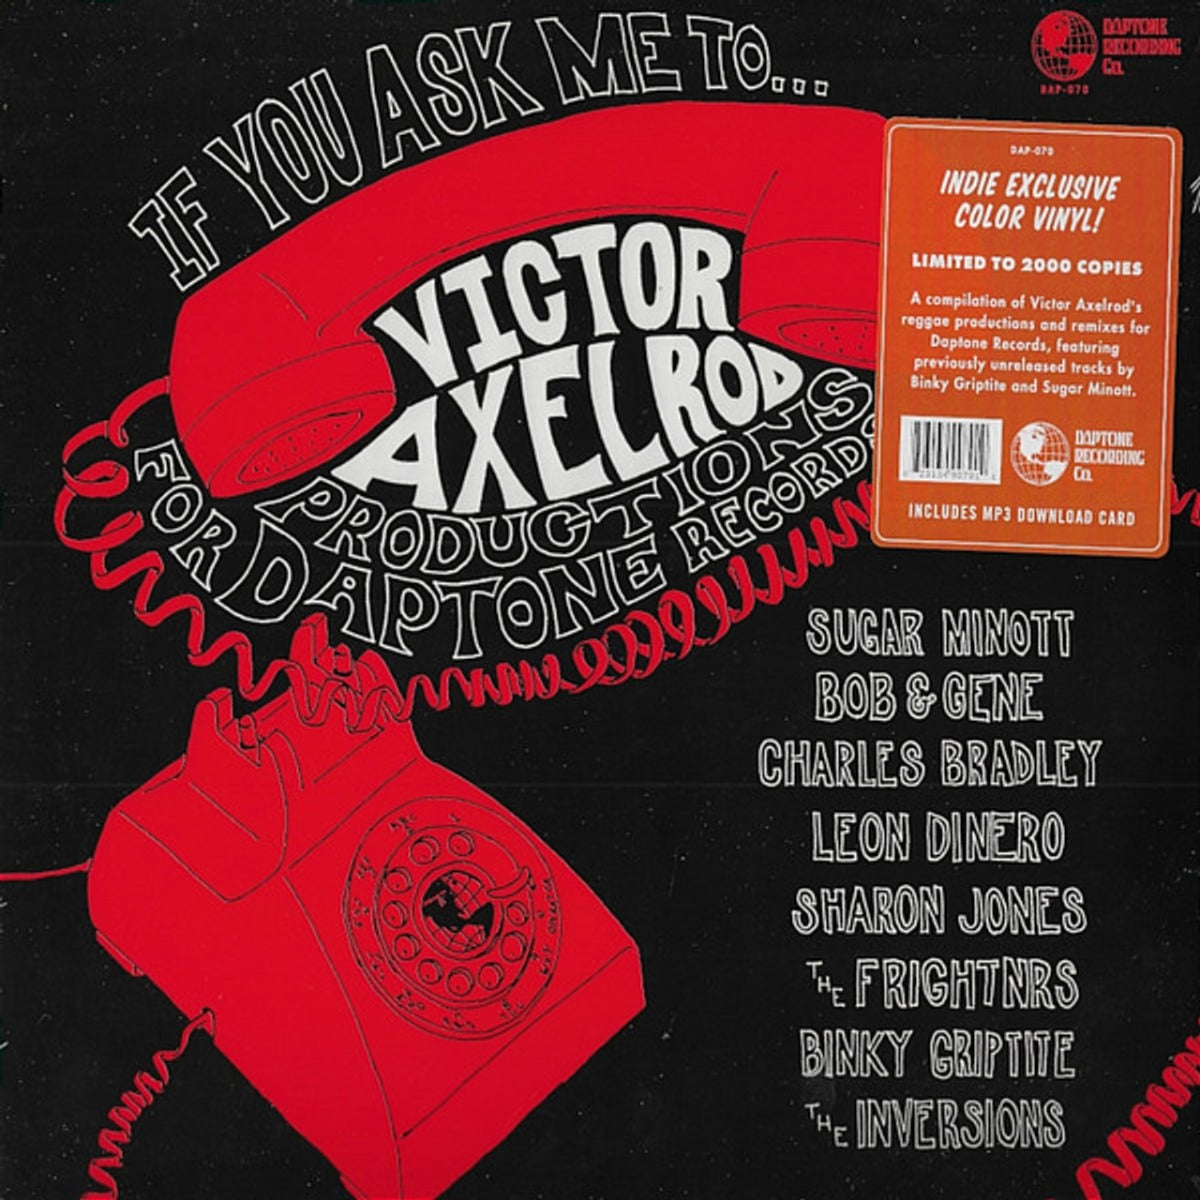 Victor Axelrod | If You Ask Me To.. (Indie Exclusive, Clear Vinyl, Red, Black, Digital Download Card) | Vinyl